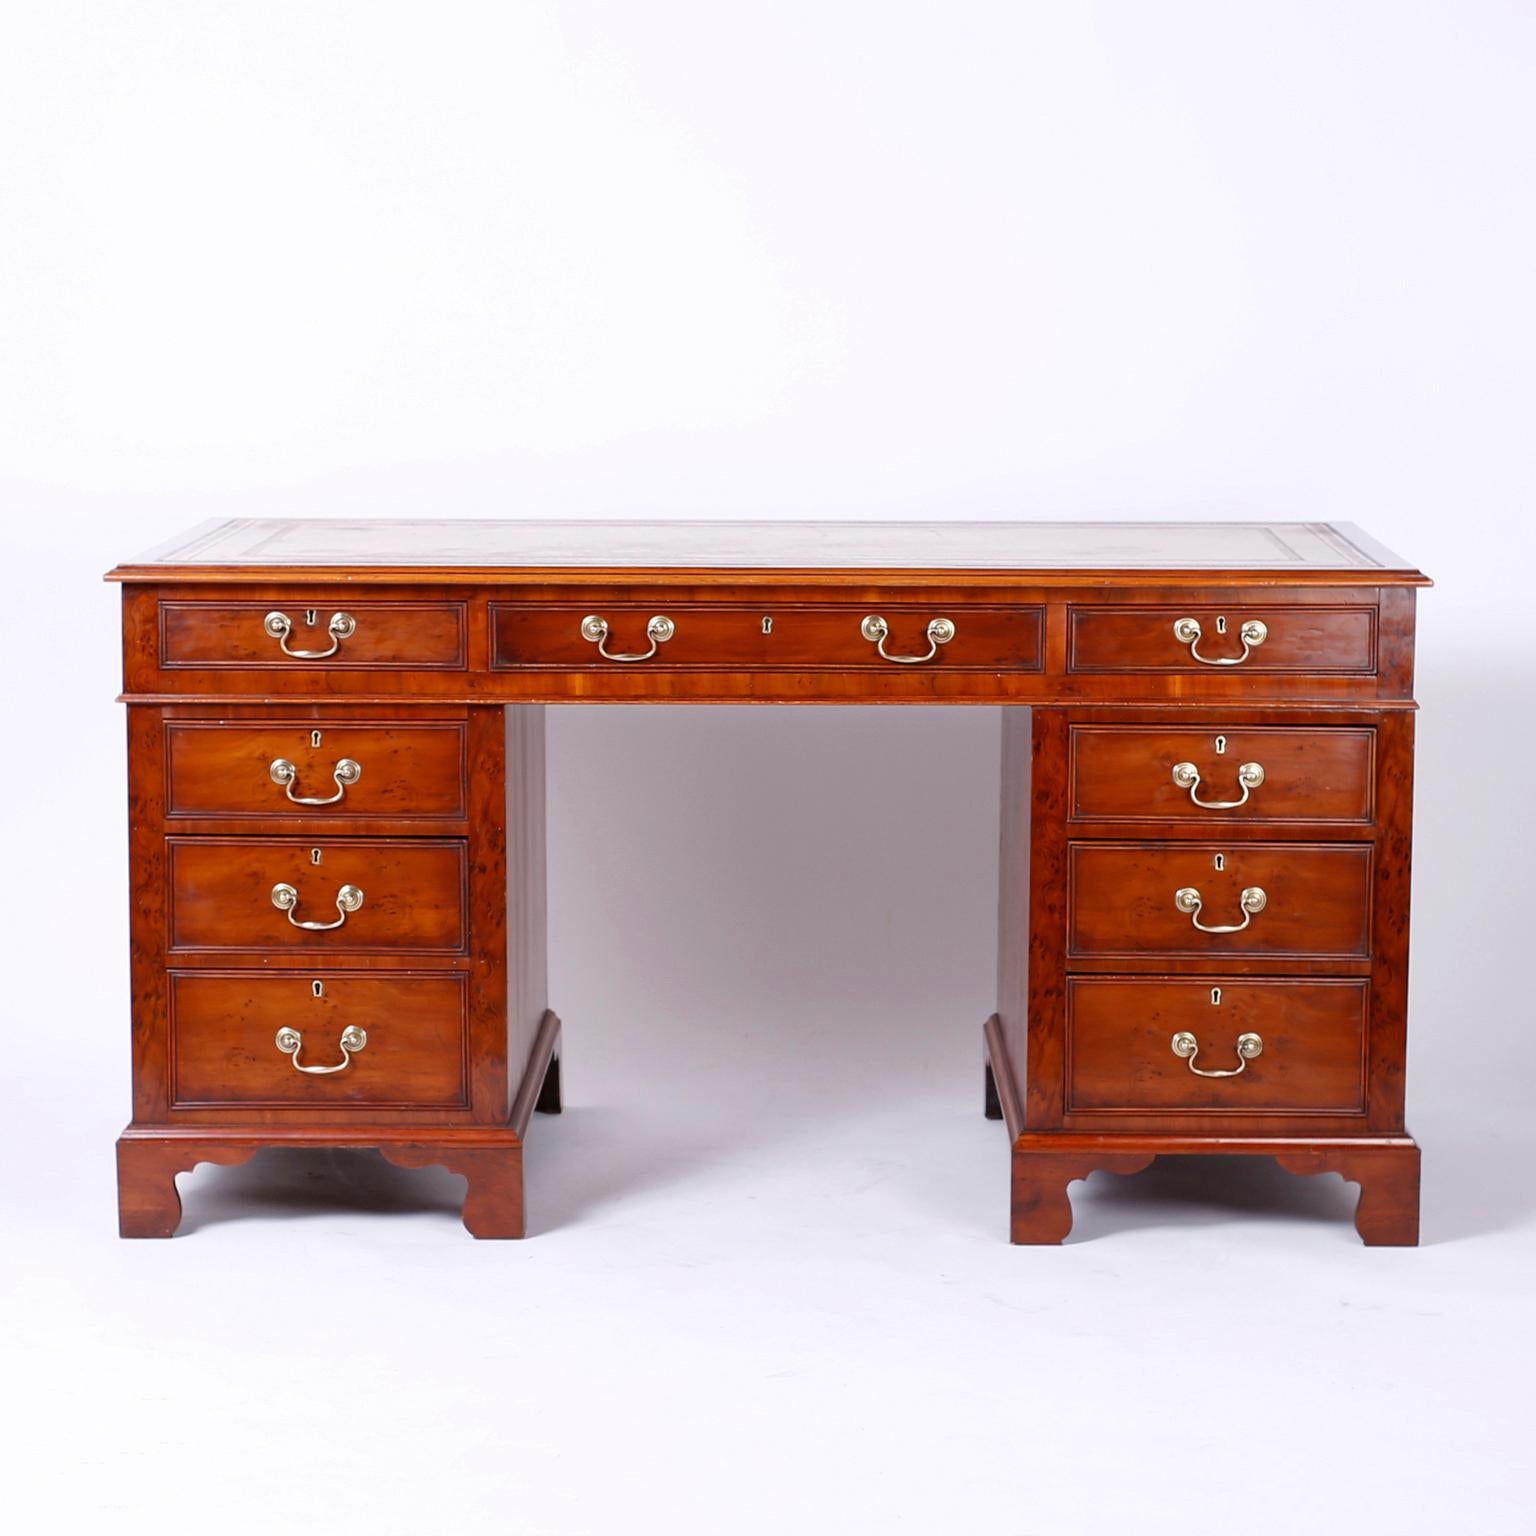 Antique 19th century English desk crafted in well grain and burled yew wood, having the original tooled mustard leather top now aged to perfection, nine drawers in front, finished back and set on classic bracket feet. 

Kneehole width 24 inches.